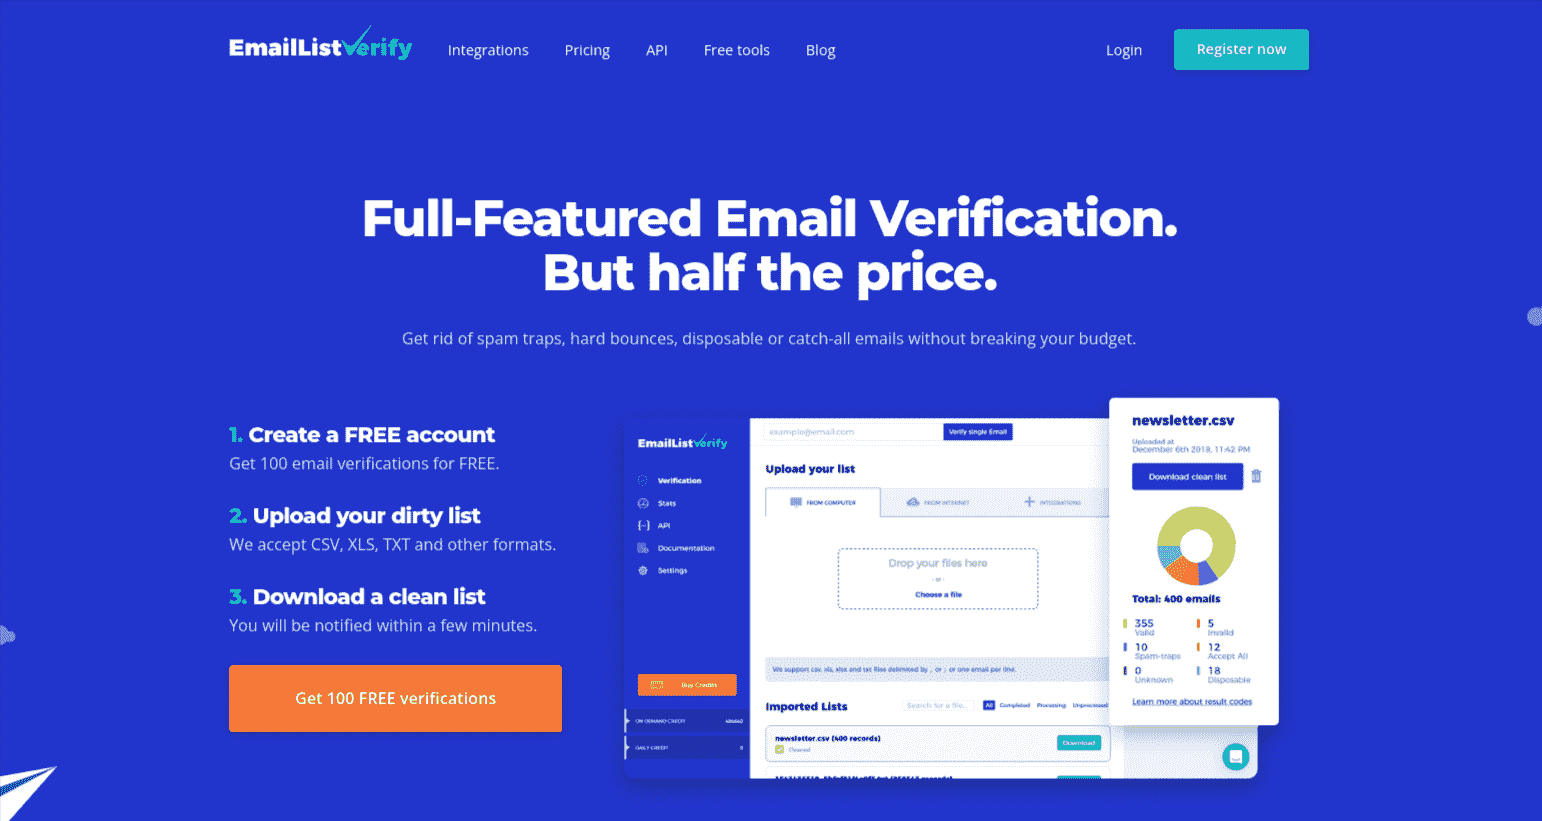 EmailListVerify - Full Featured Email Verification